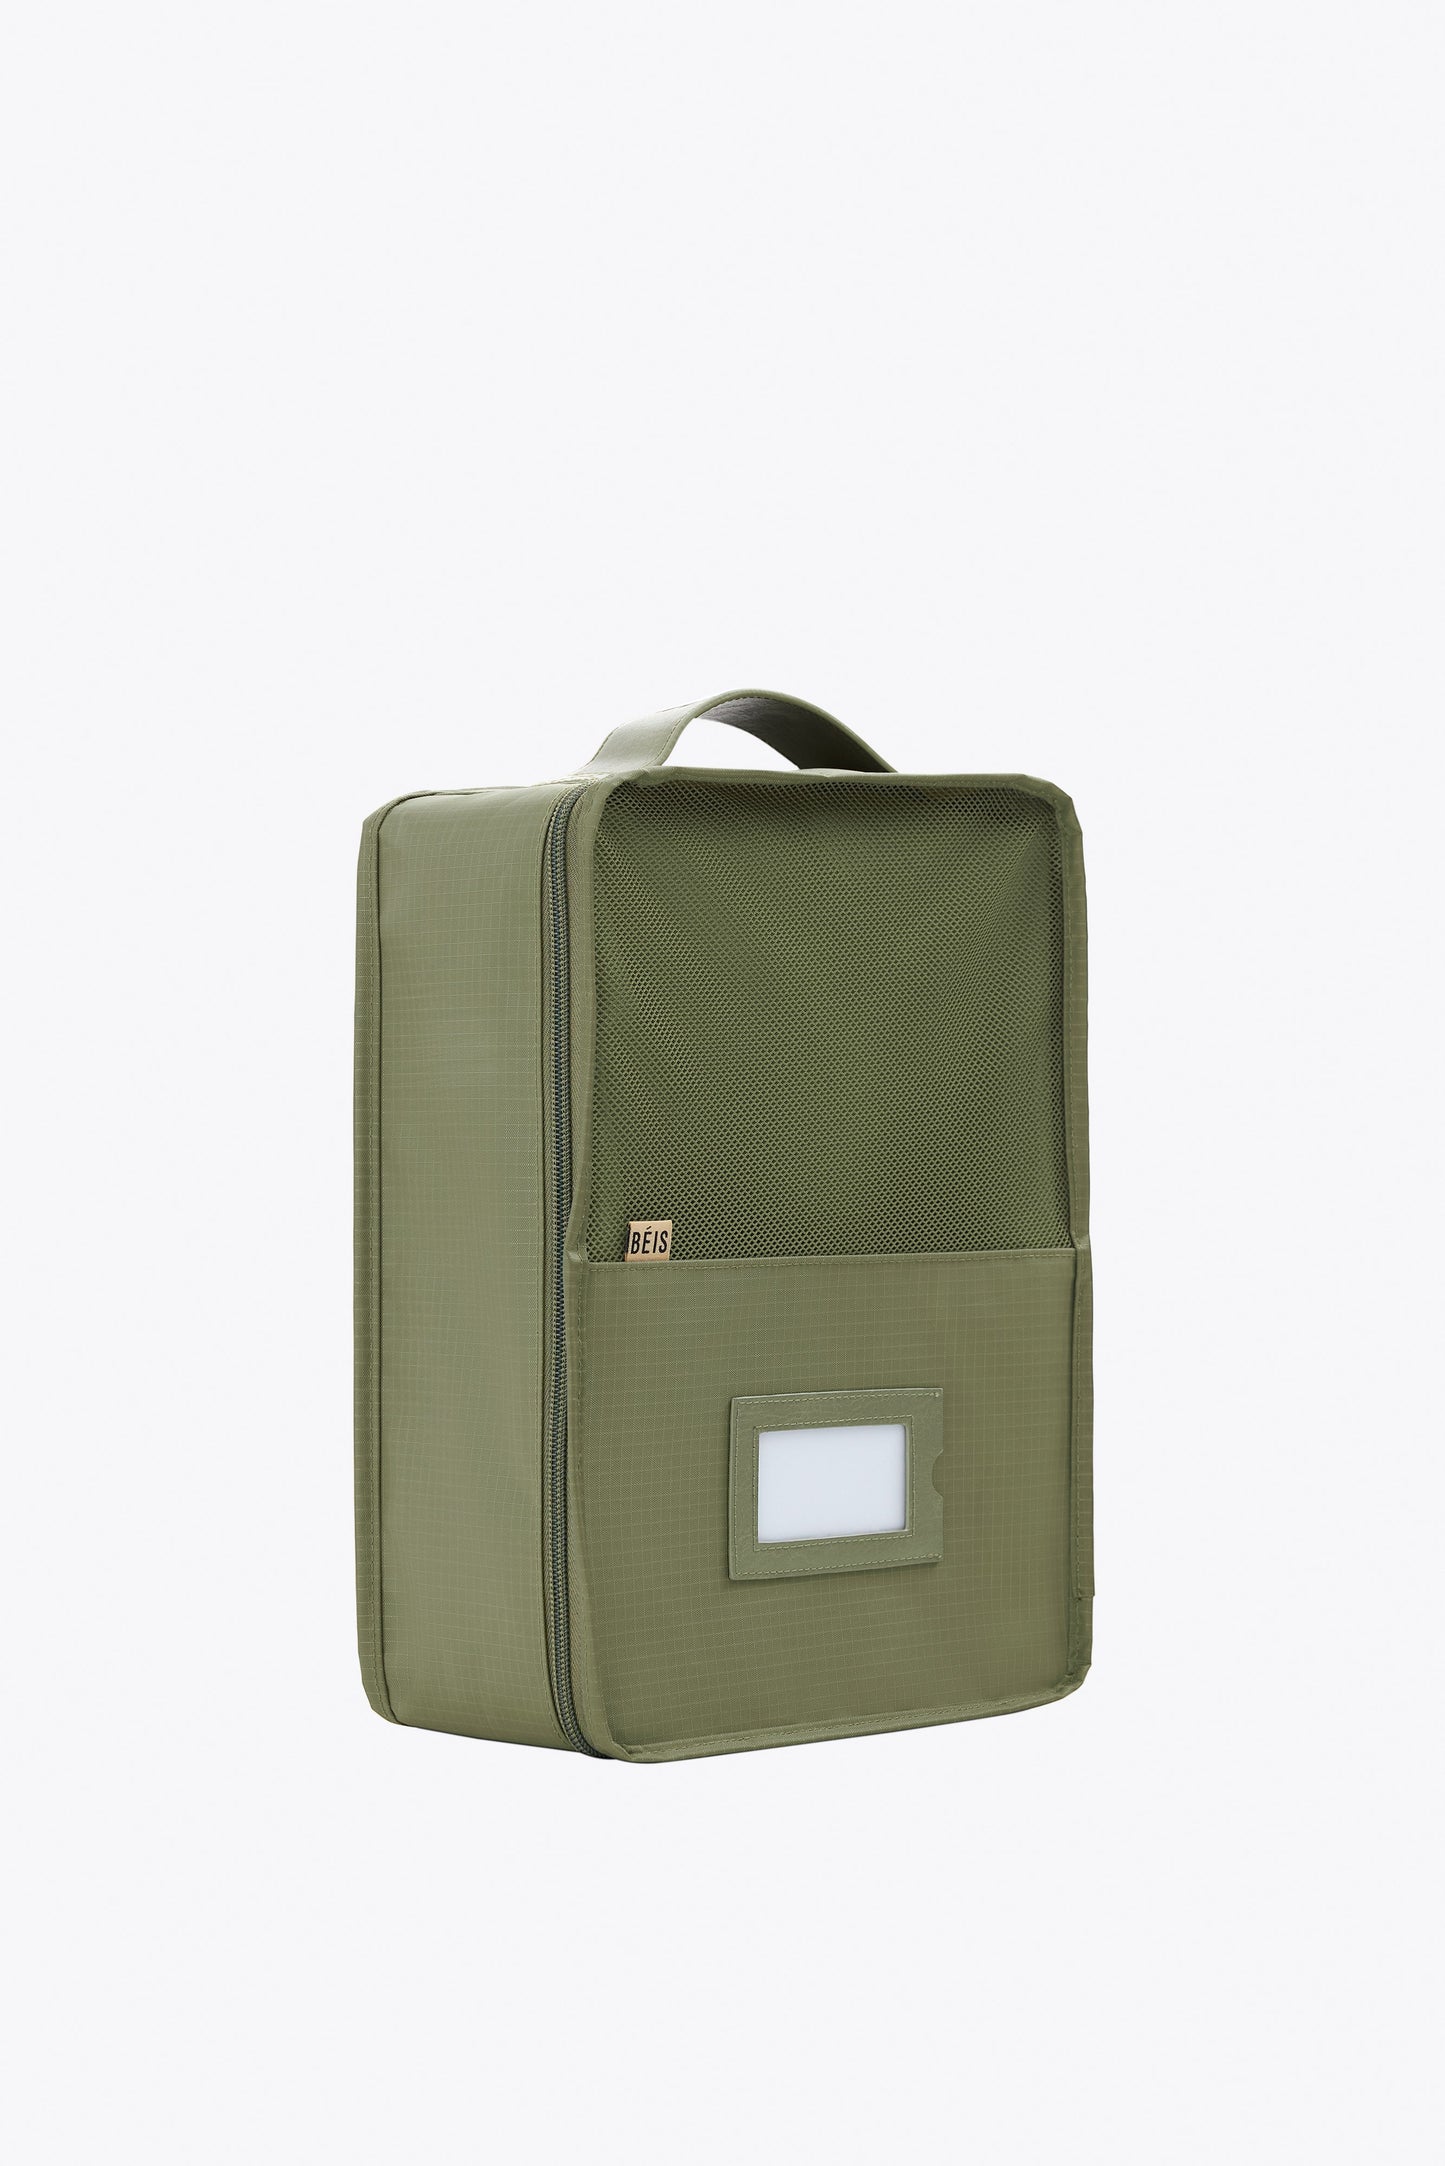 The Packing Cubes in Olive